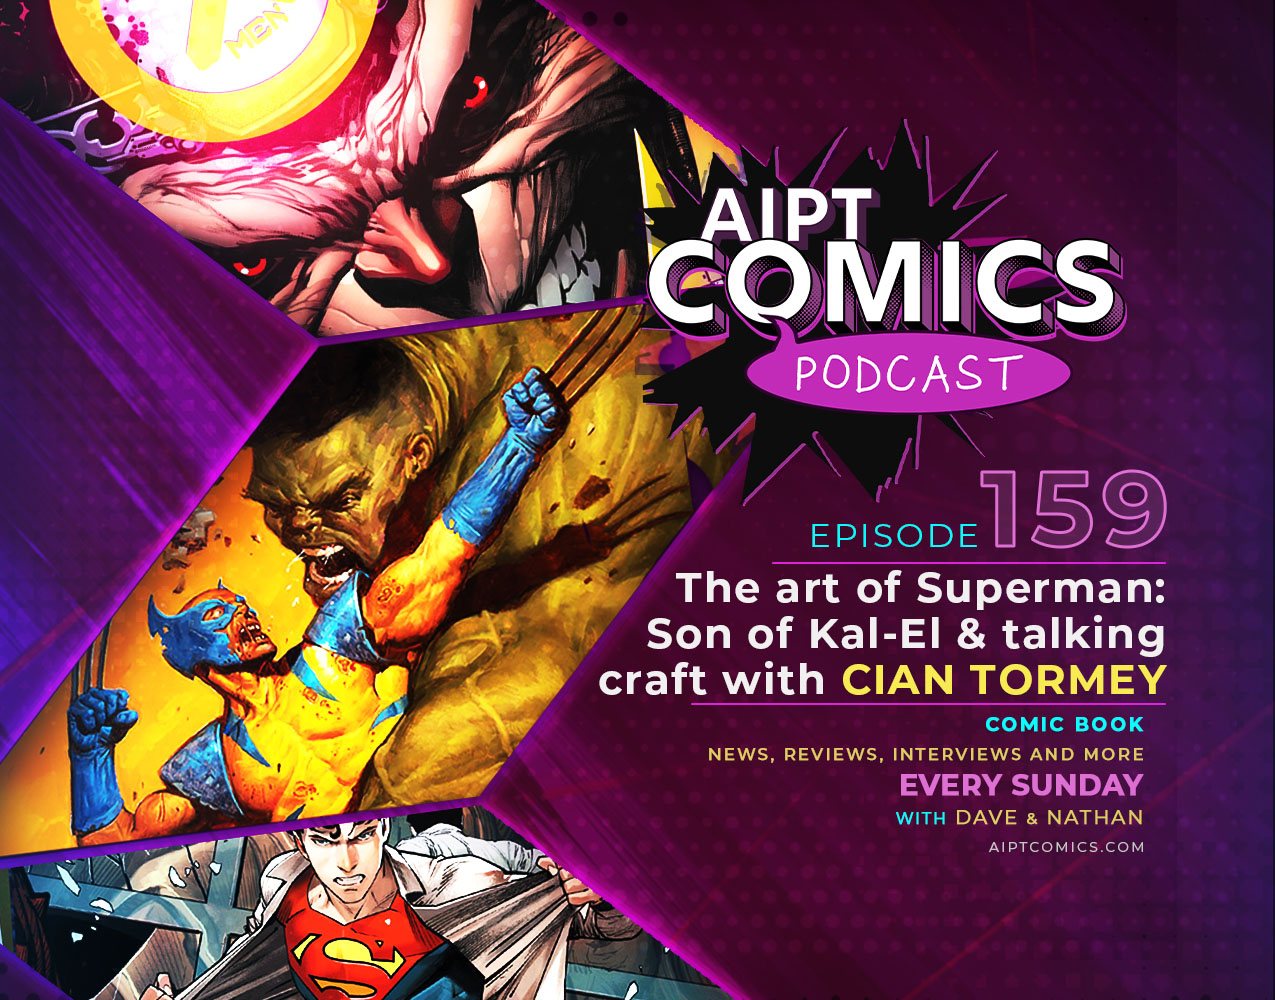 AIPT Comics Podcast Episode 159: The art of 'Superman: Son of Kal-El' & talking craft with Cian Tormey